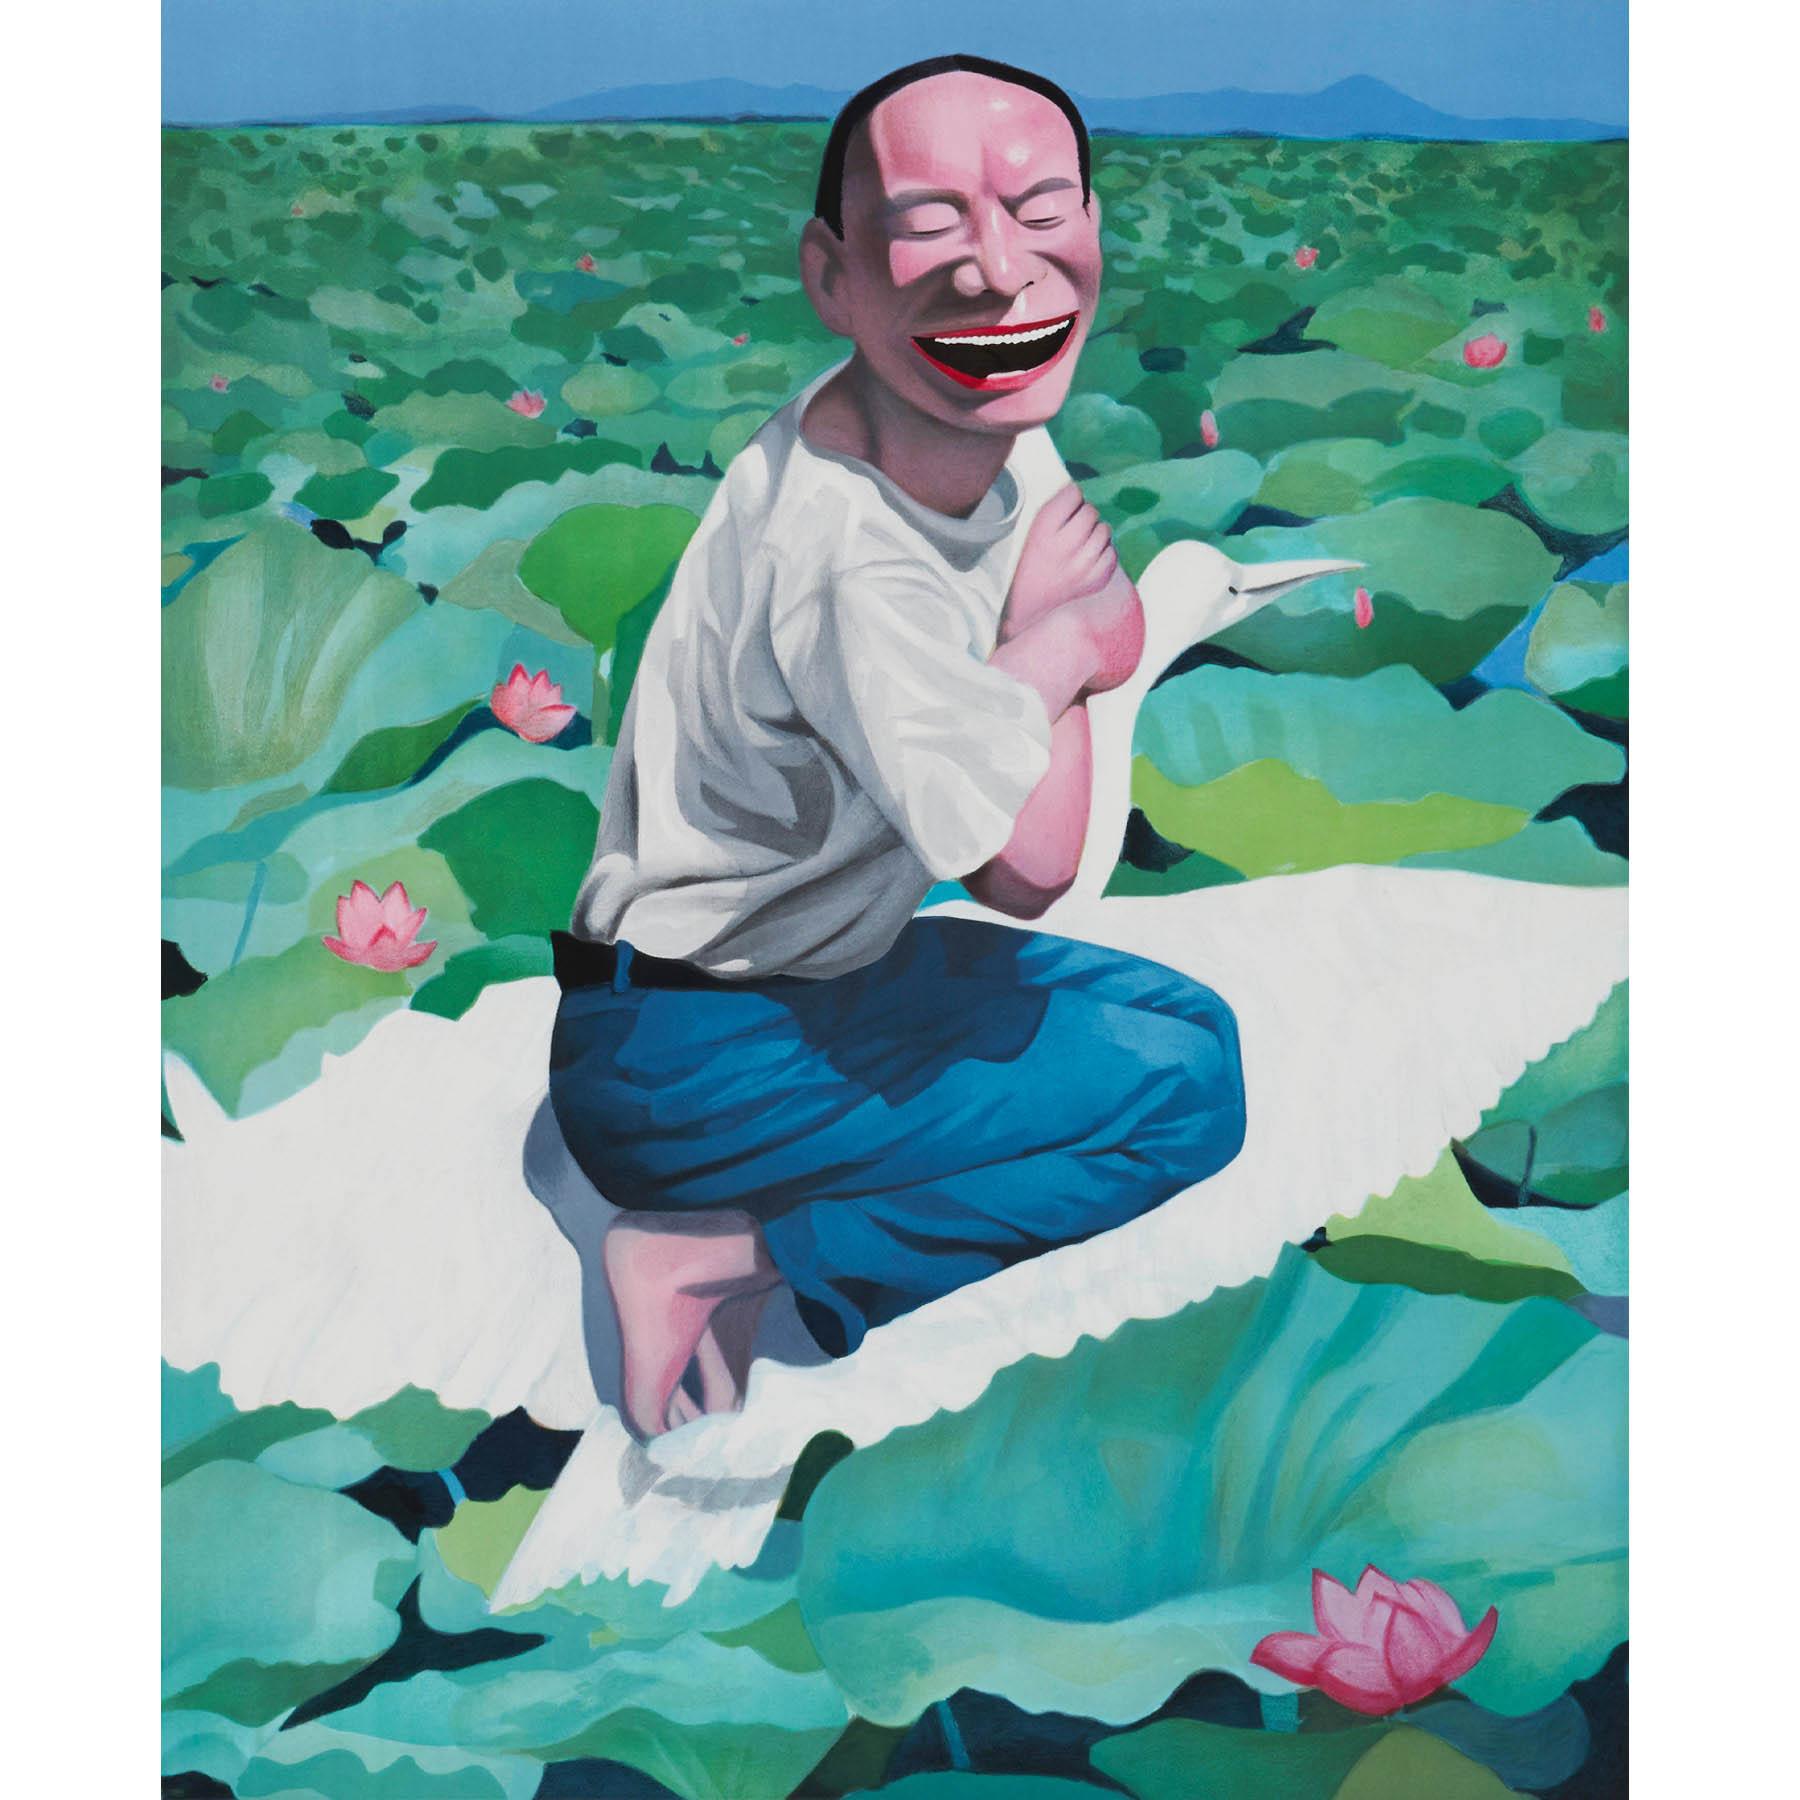 Lotus Pool - Contemporary, 21st Century, Lithograph, Limited Edition, Chinese - Print by Yue Minjun